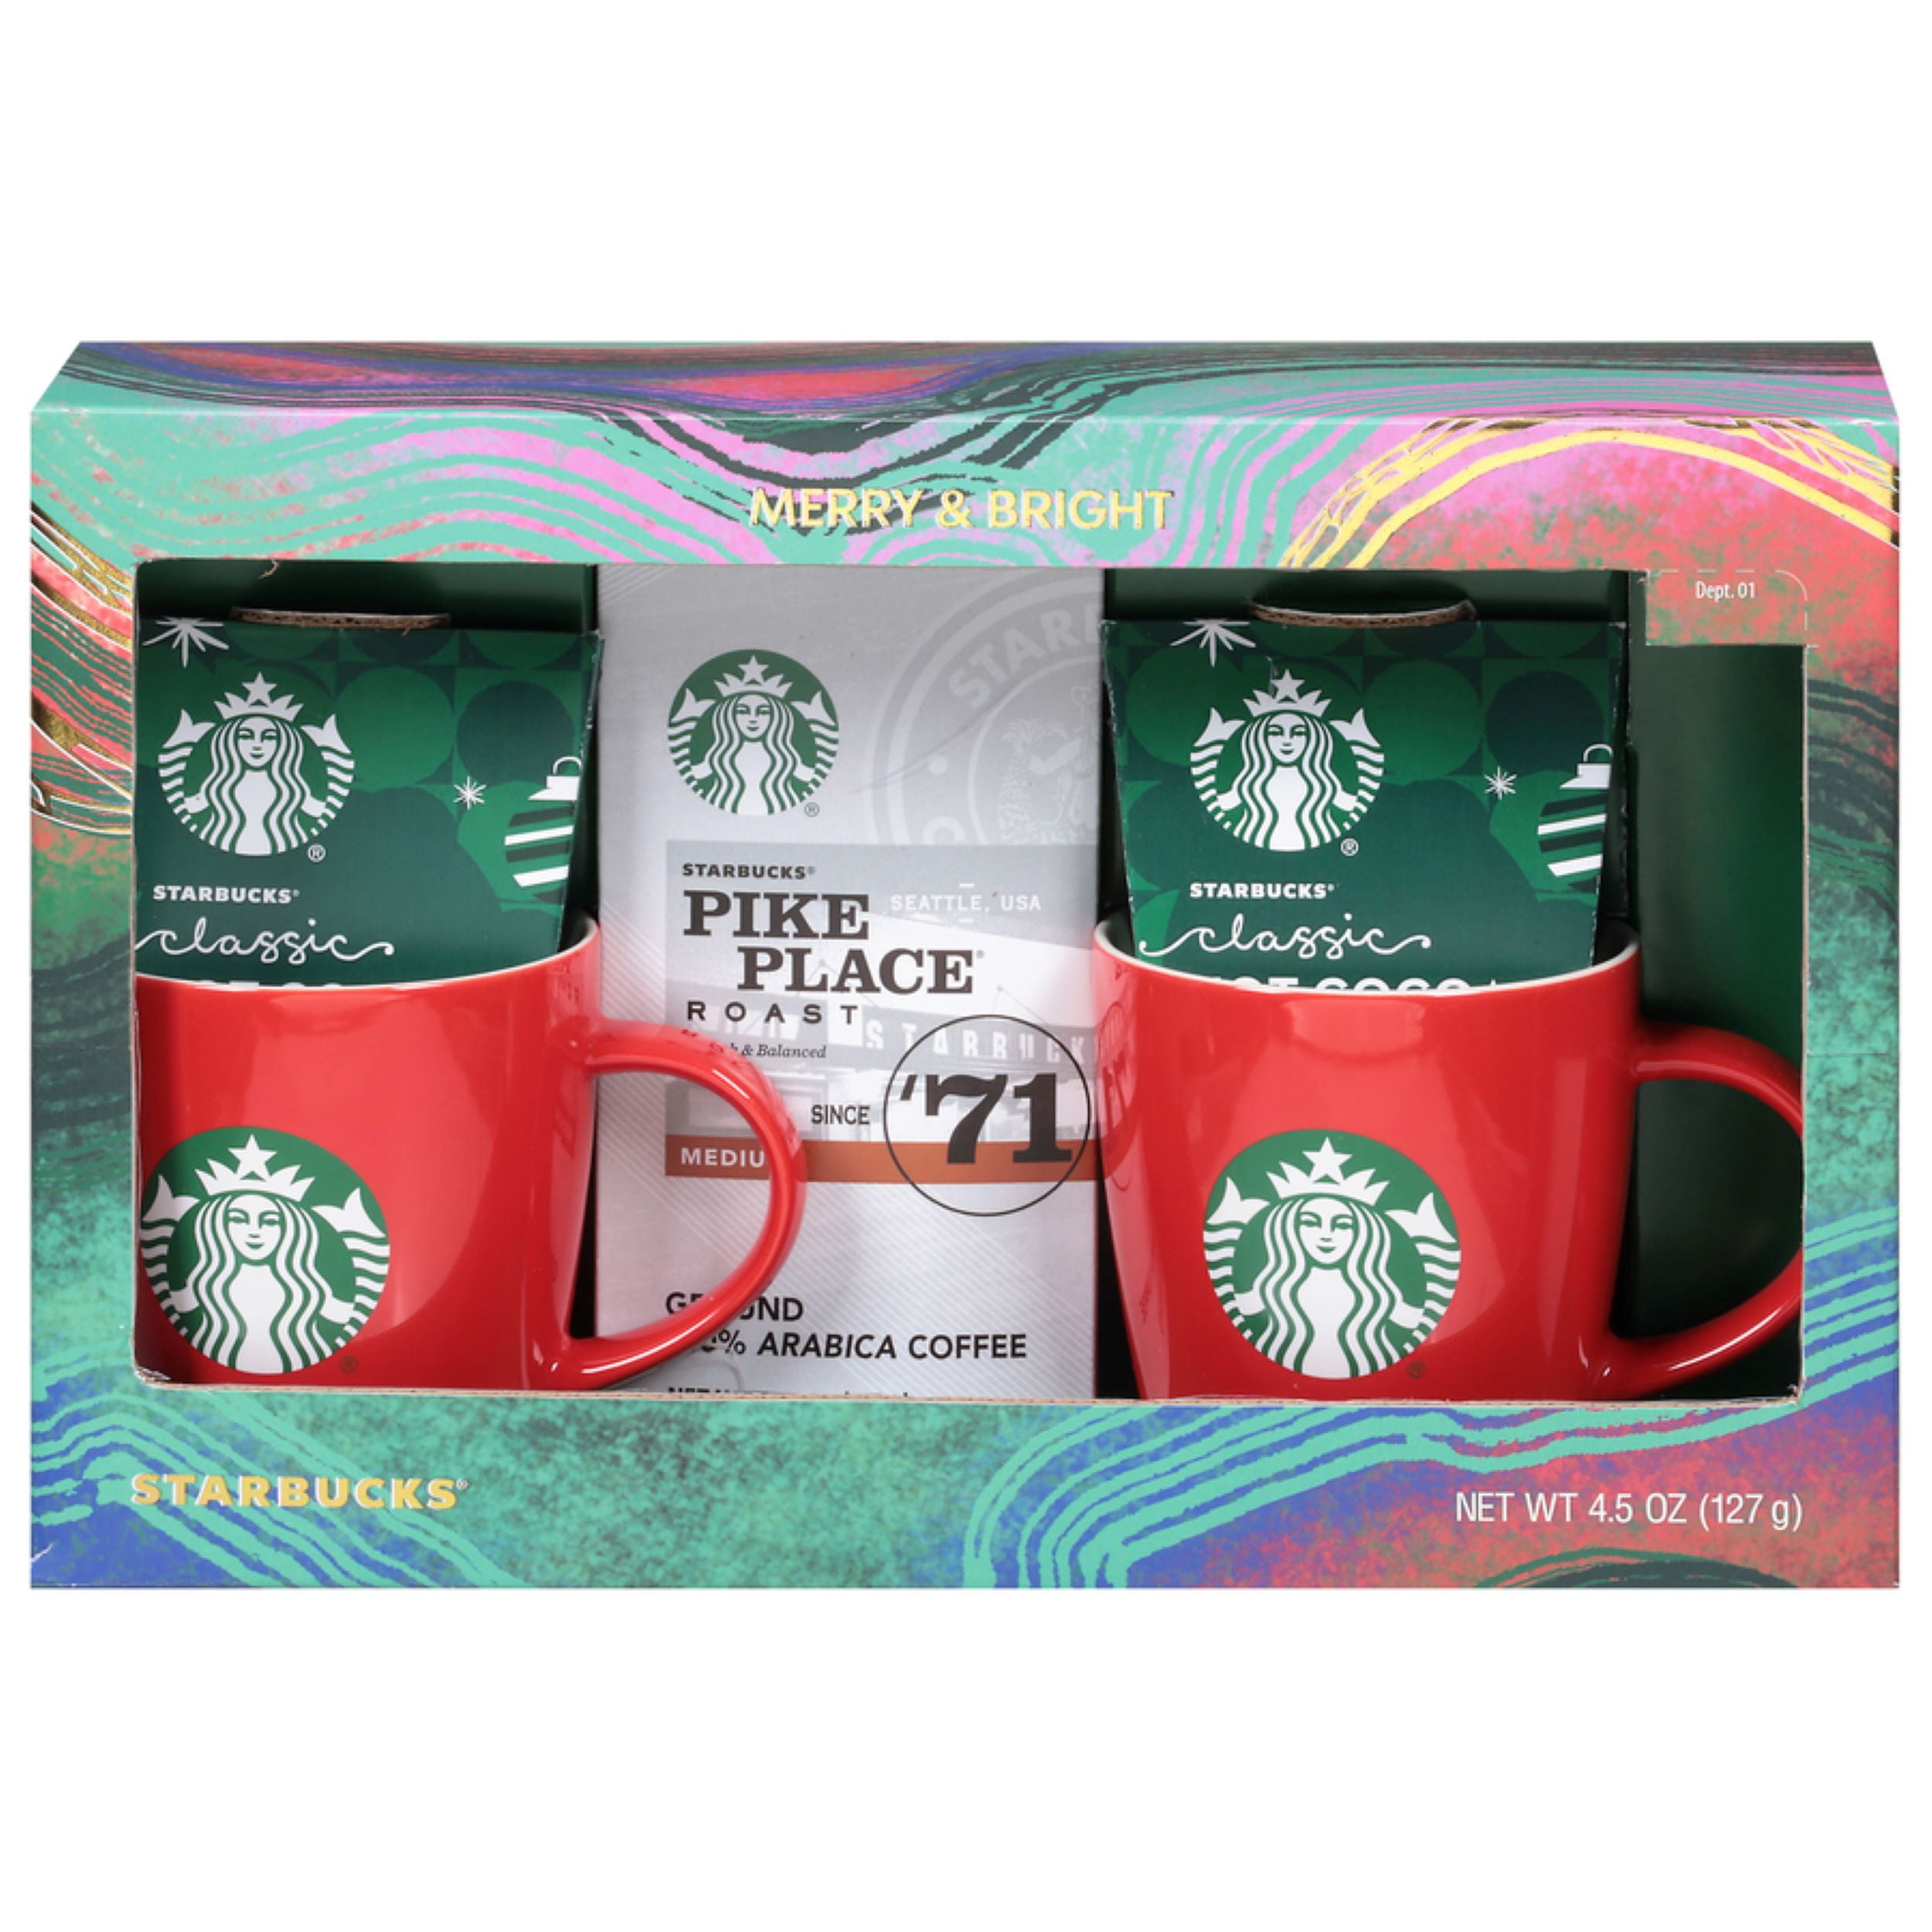 Merry and Bright Starbucks  Holiday Gift Pack with Ceramic mugs, Starbucks Classic Hot Cocoa and Starbucks Pike Place Roast Coffee